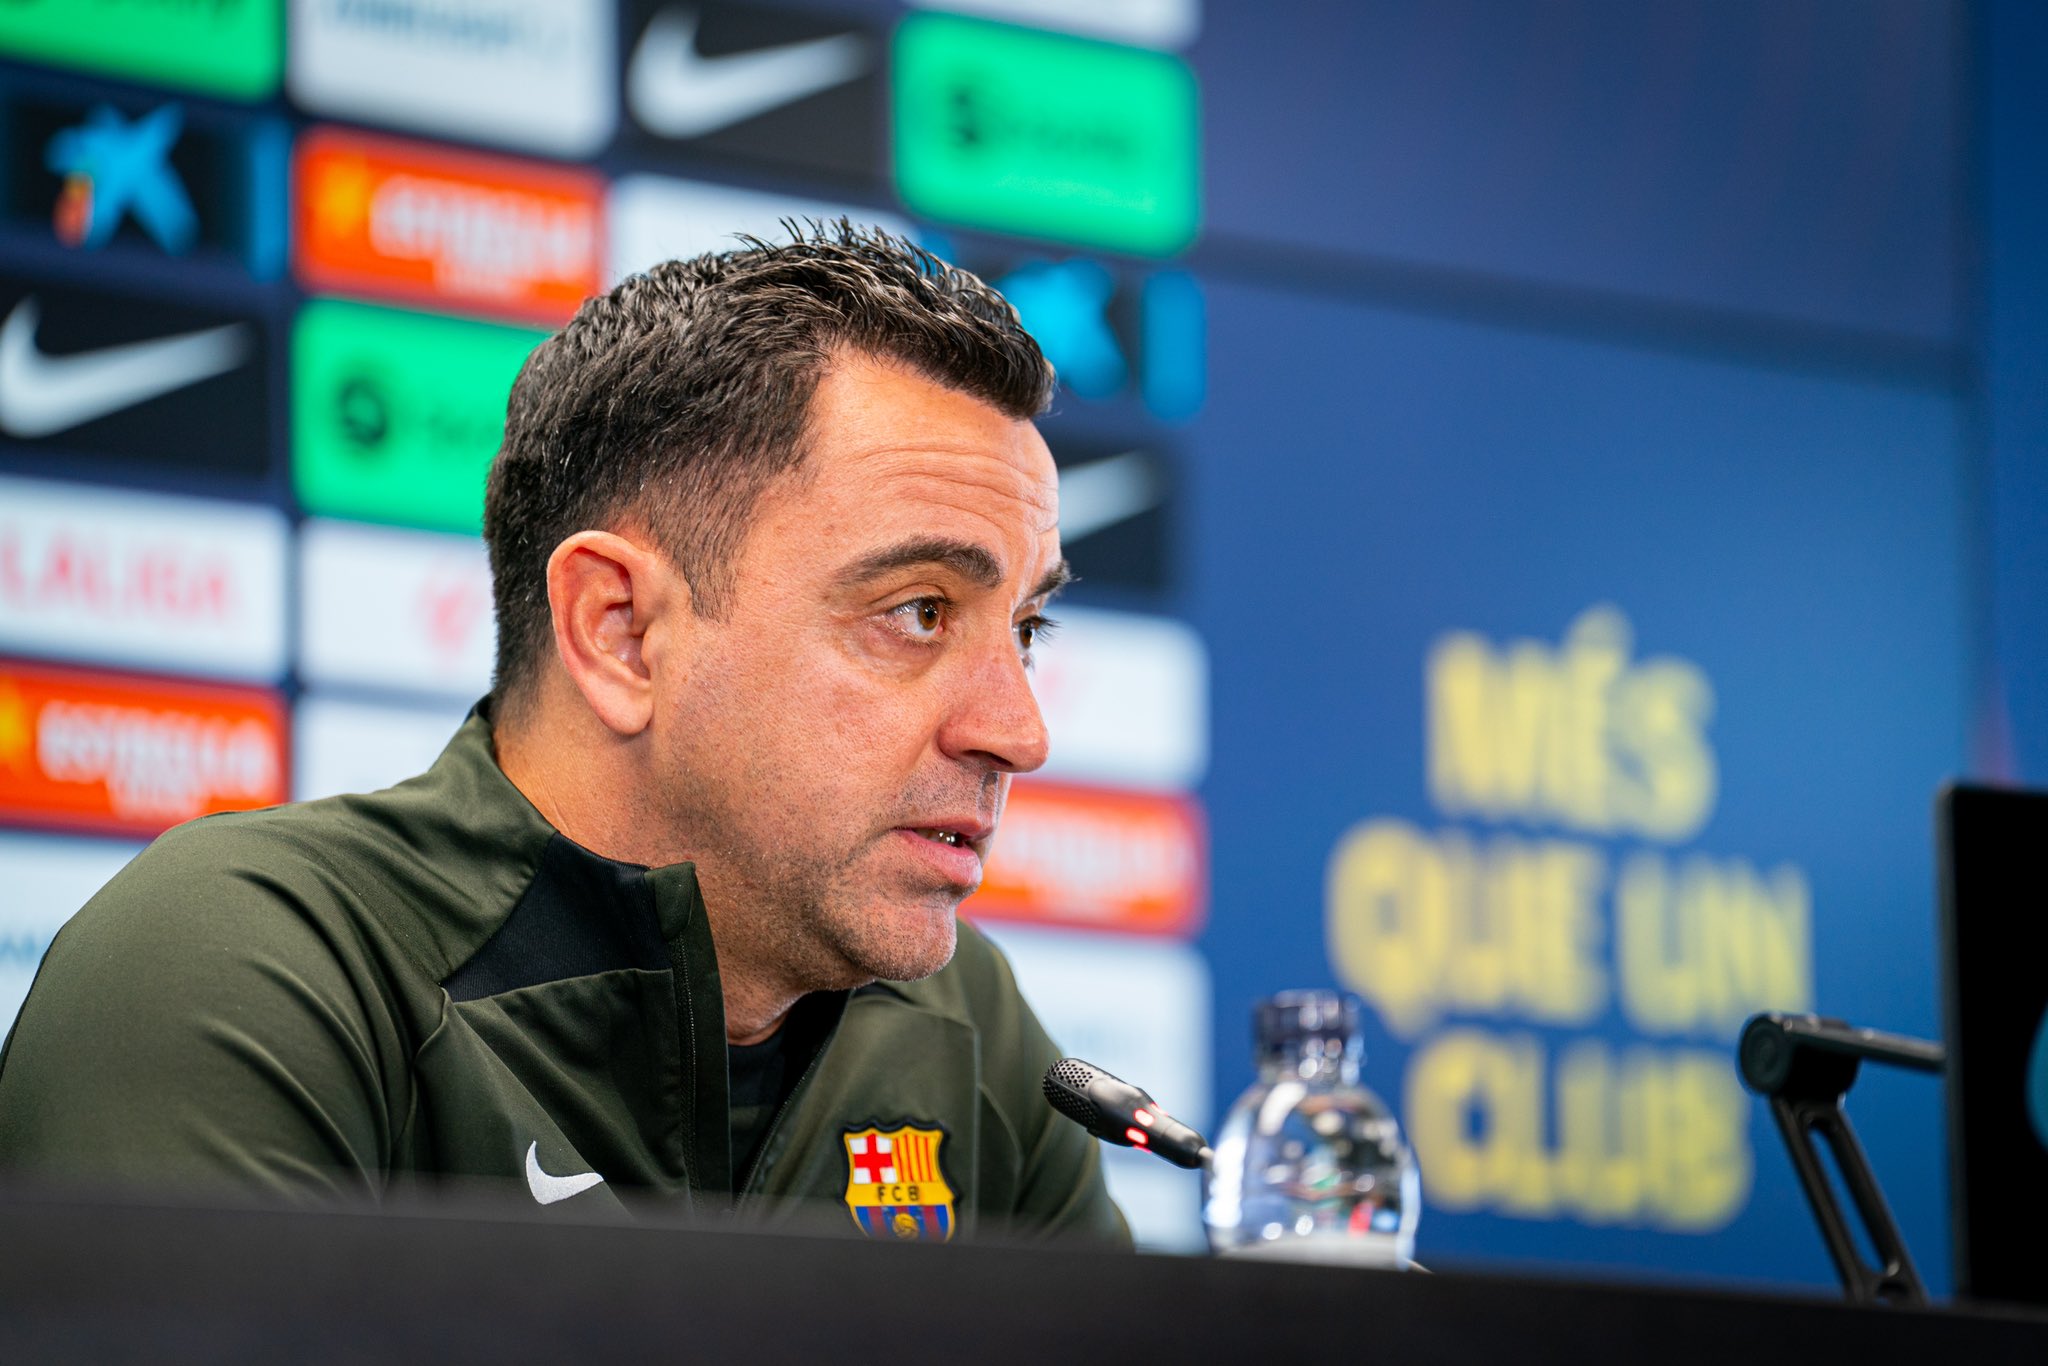 Barcelona manager Xavi Hernandez says there will be no changes to staff amid reports of addition